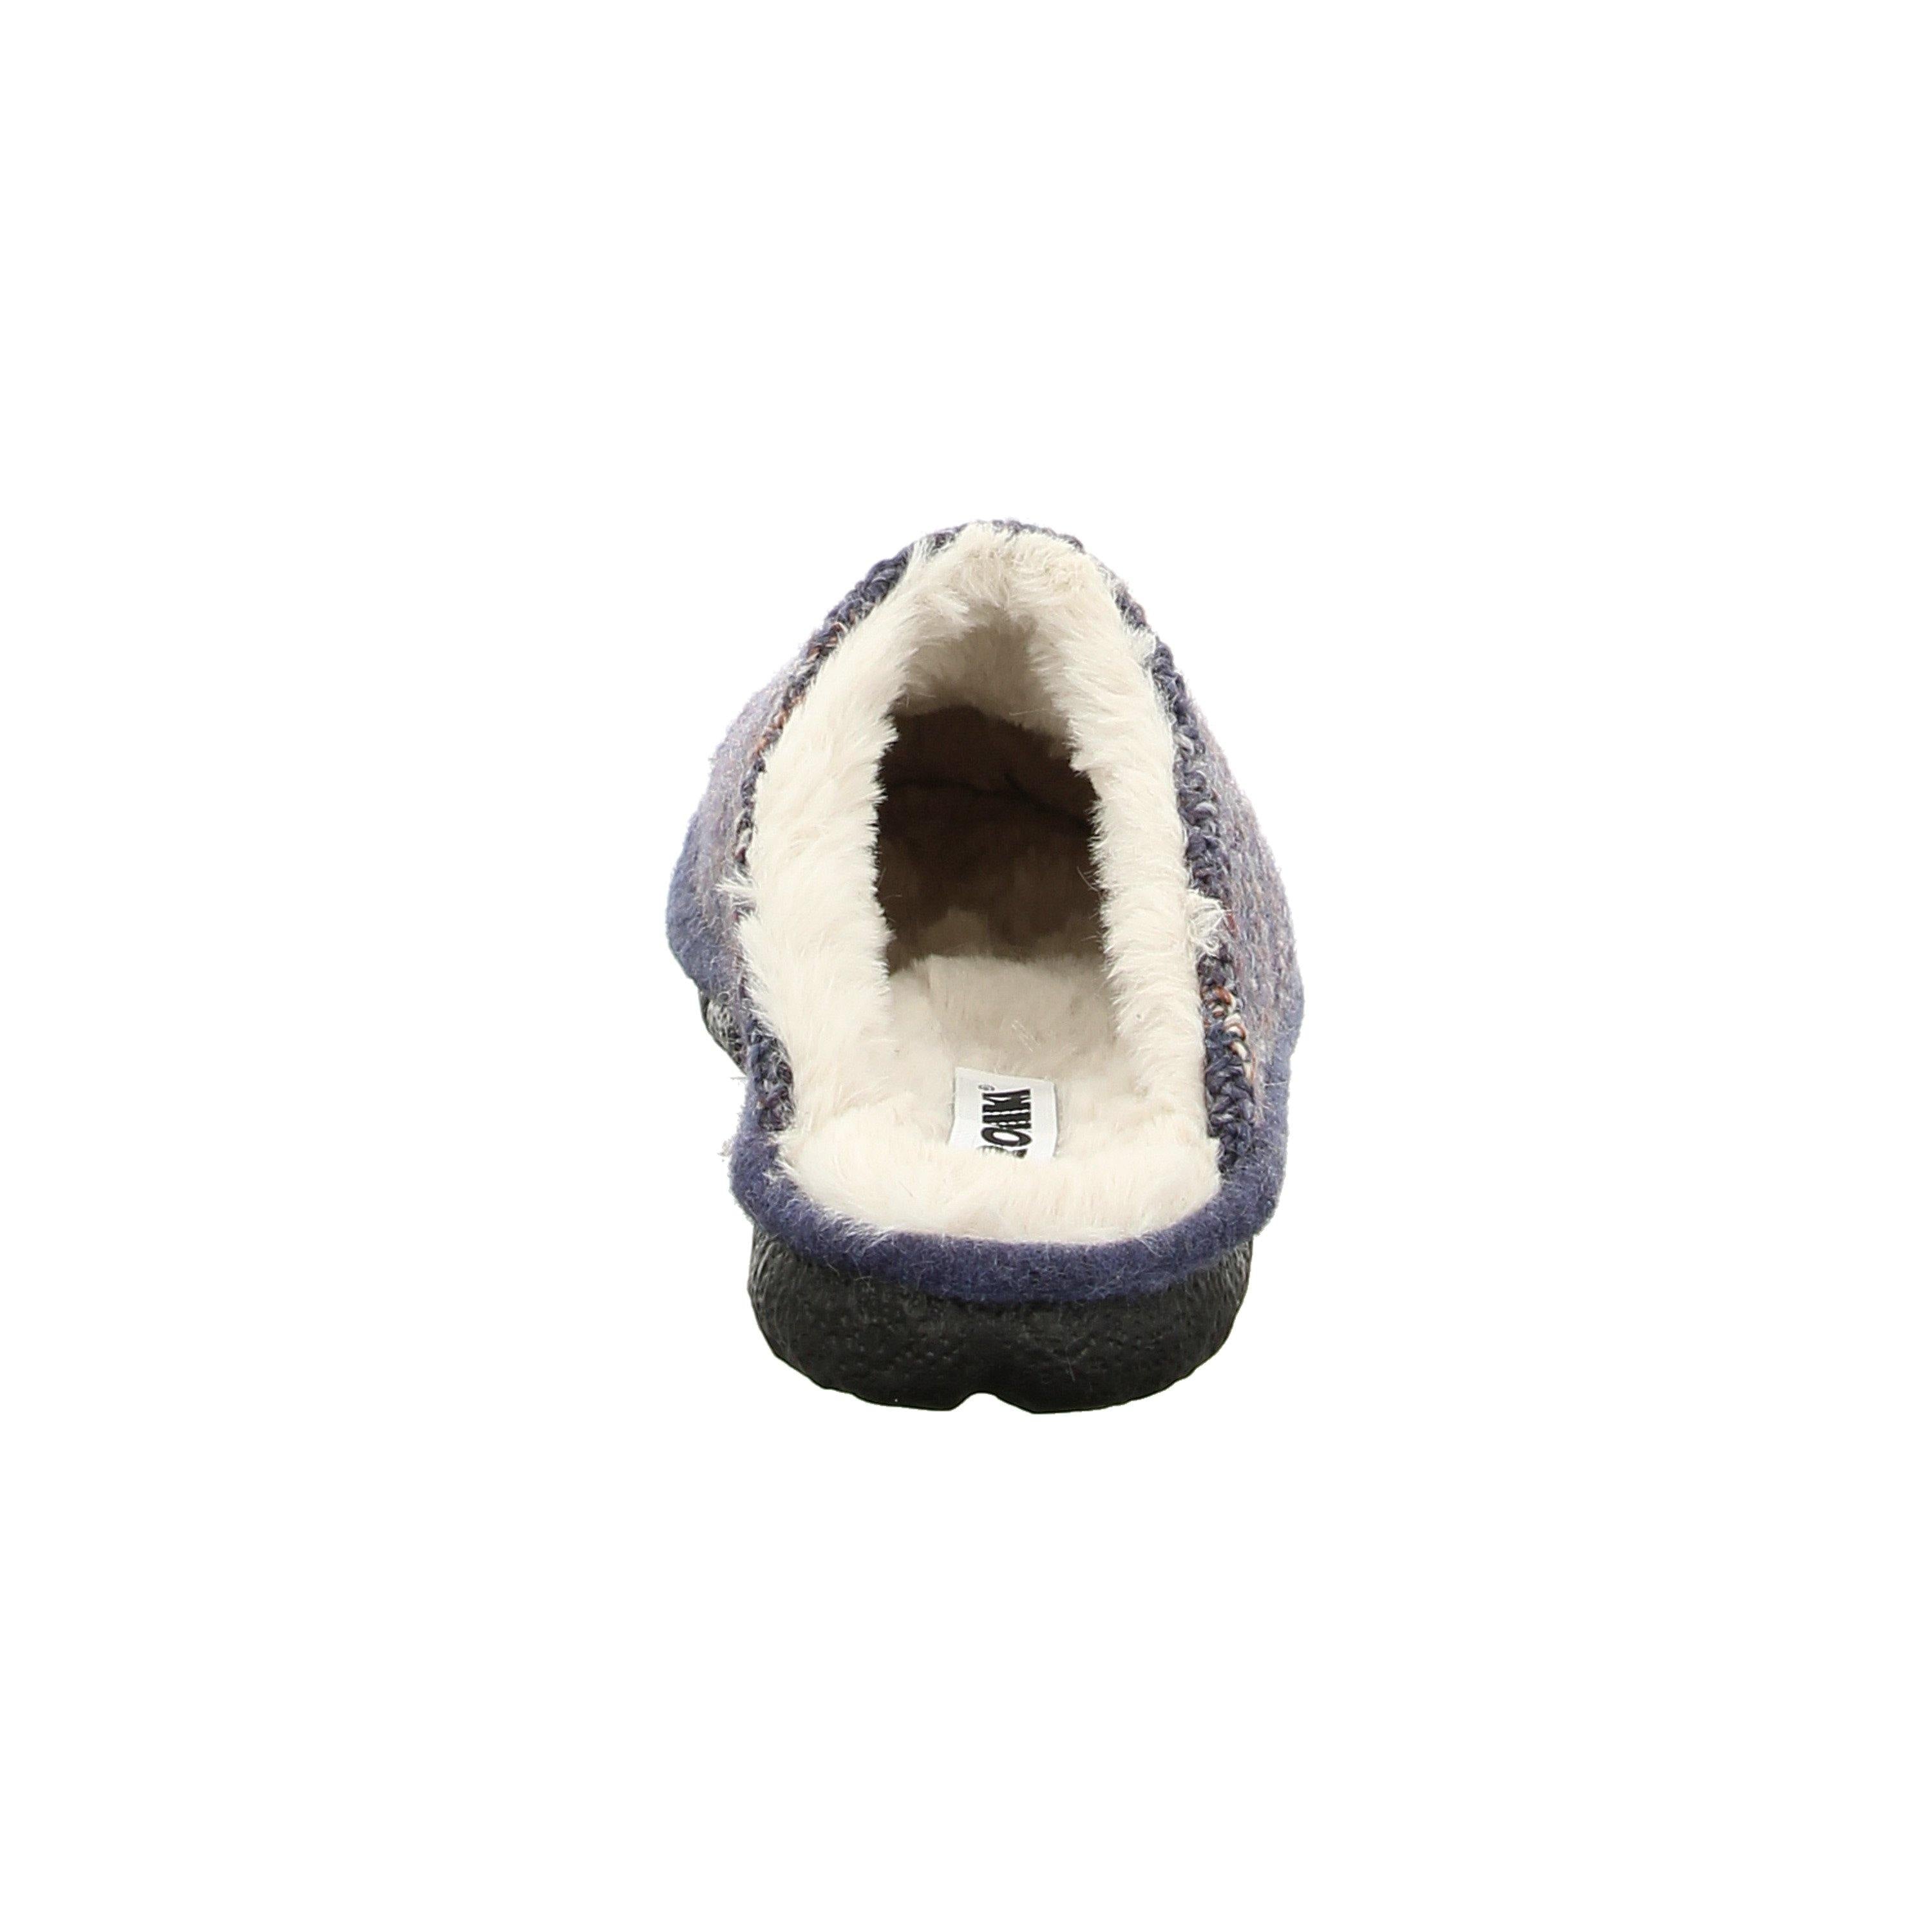 Slipper style LILLE 108 by Romika USA